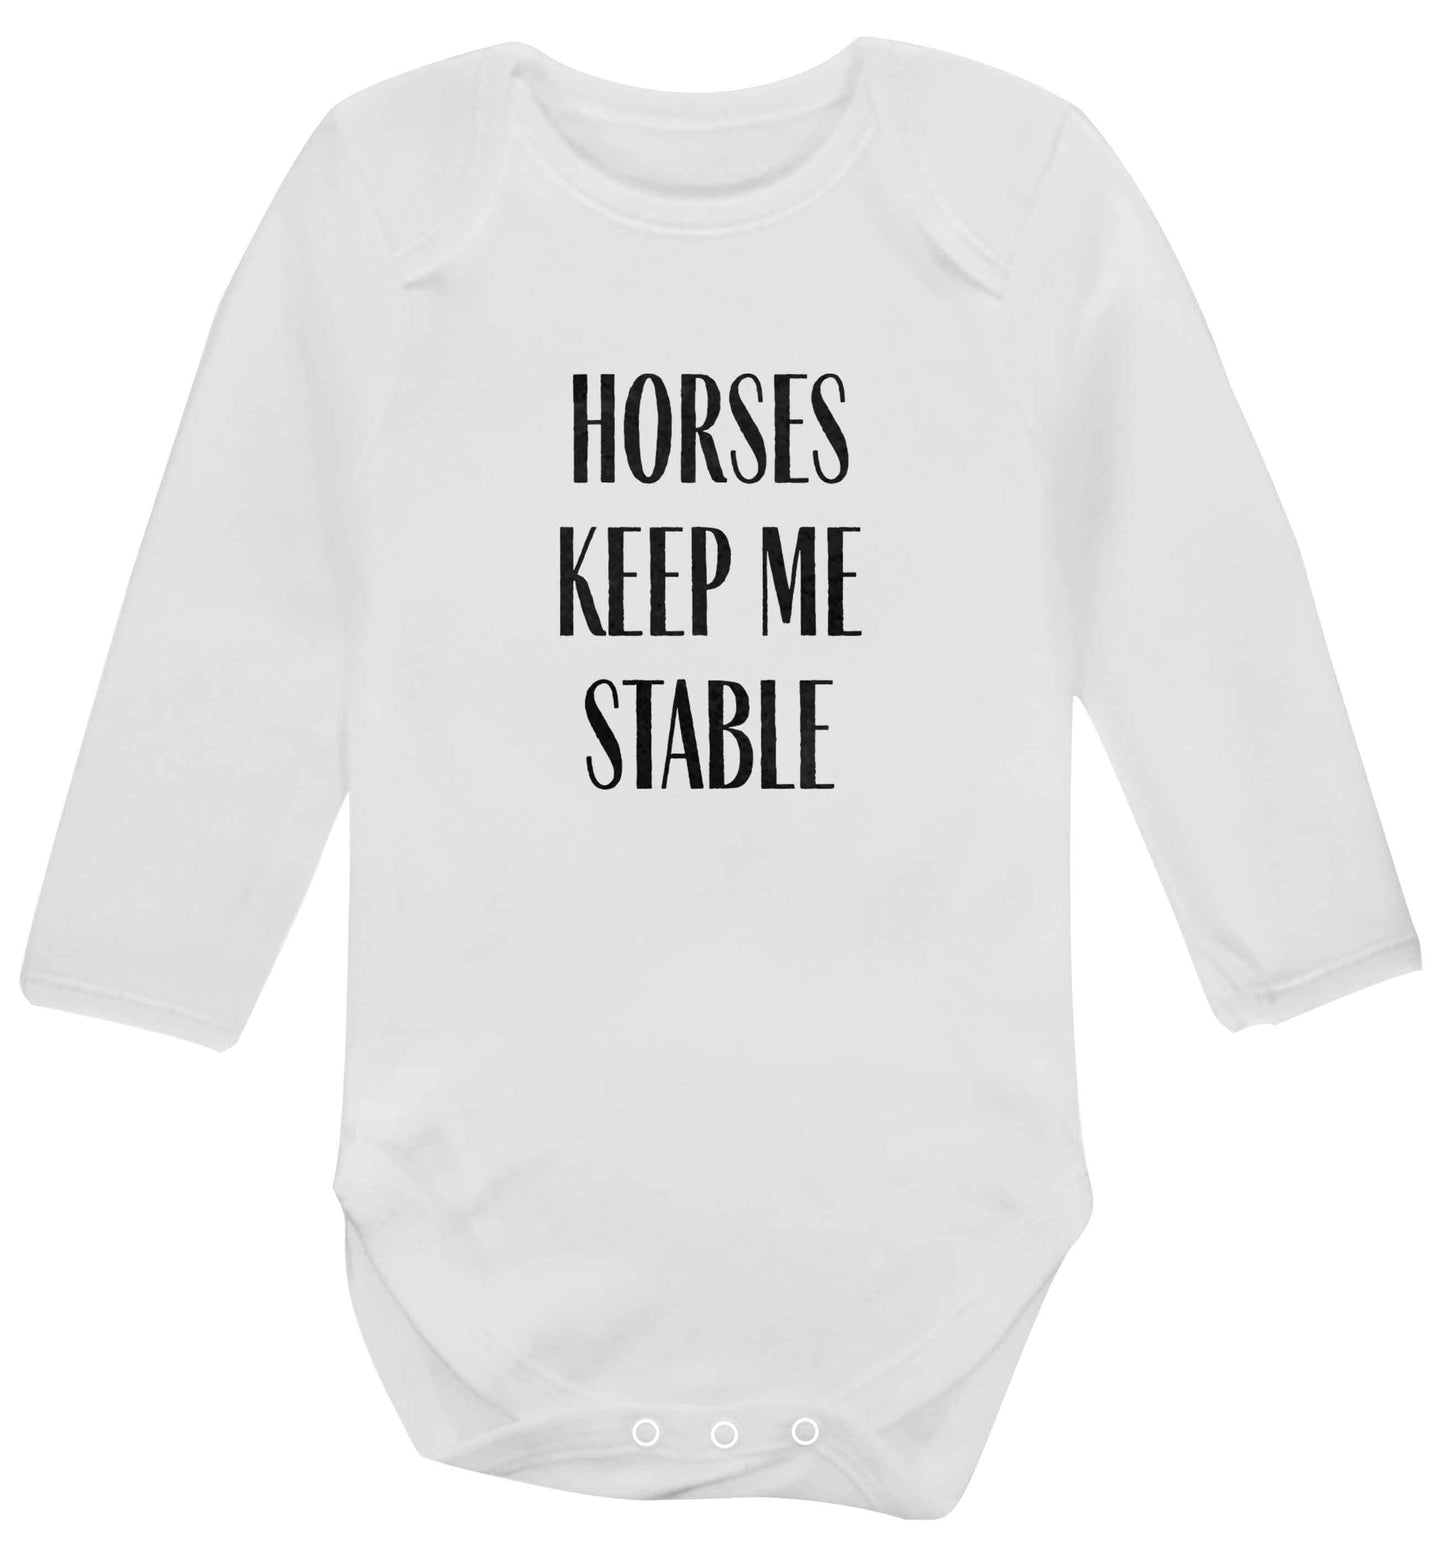 Horses keep me stable baby vest long sleeved white 6-12 months